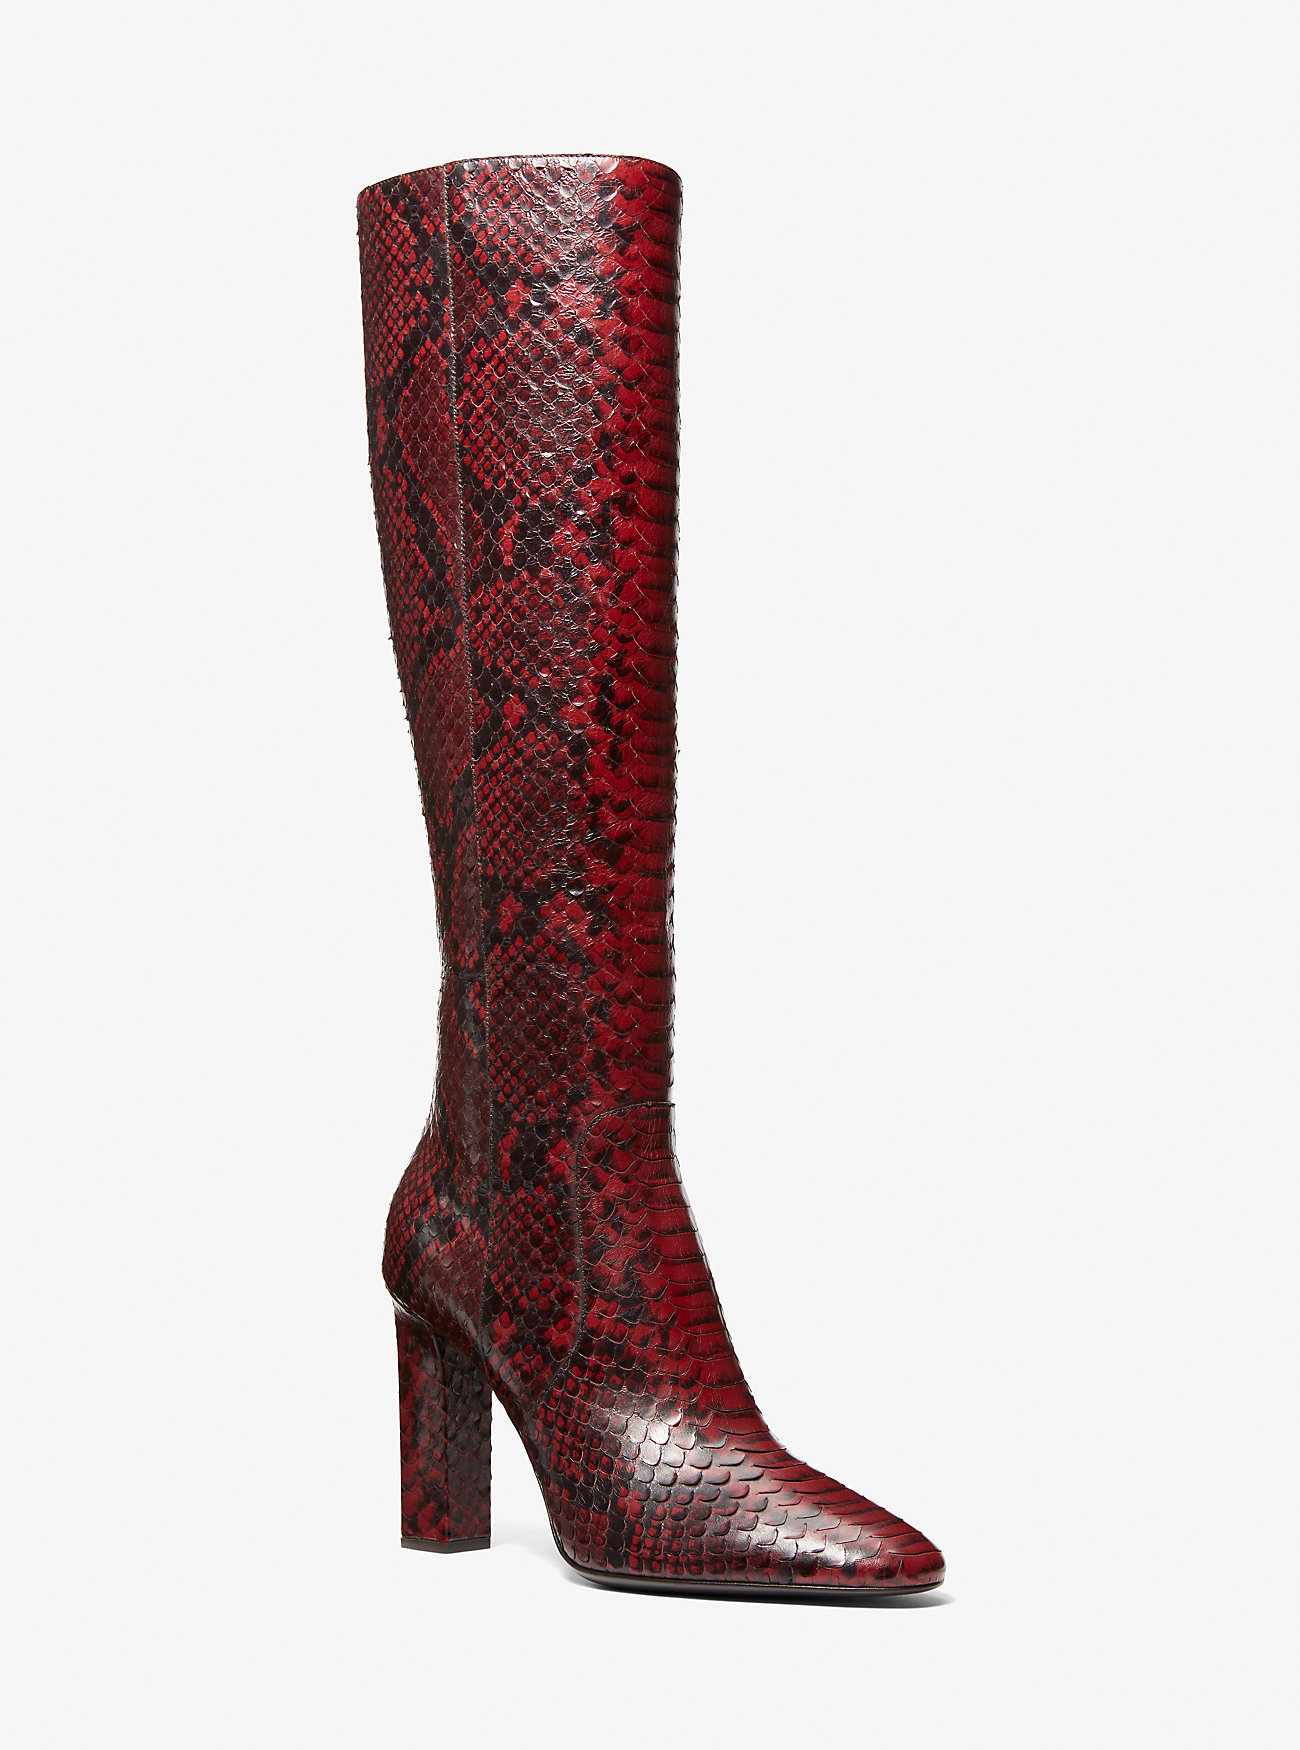 Michaelkors Carly Python Embossed Leather Boot